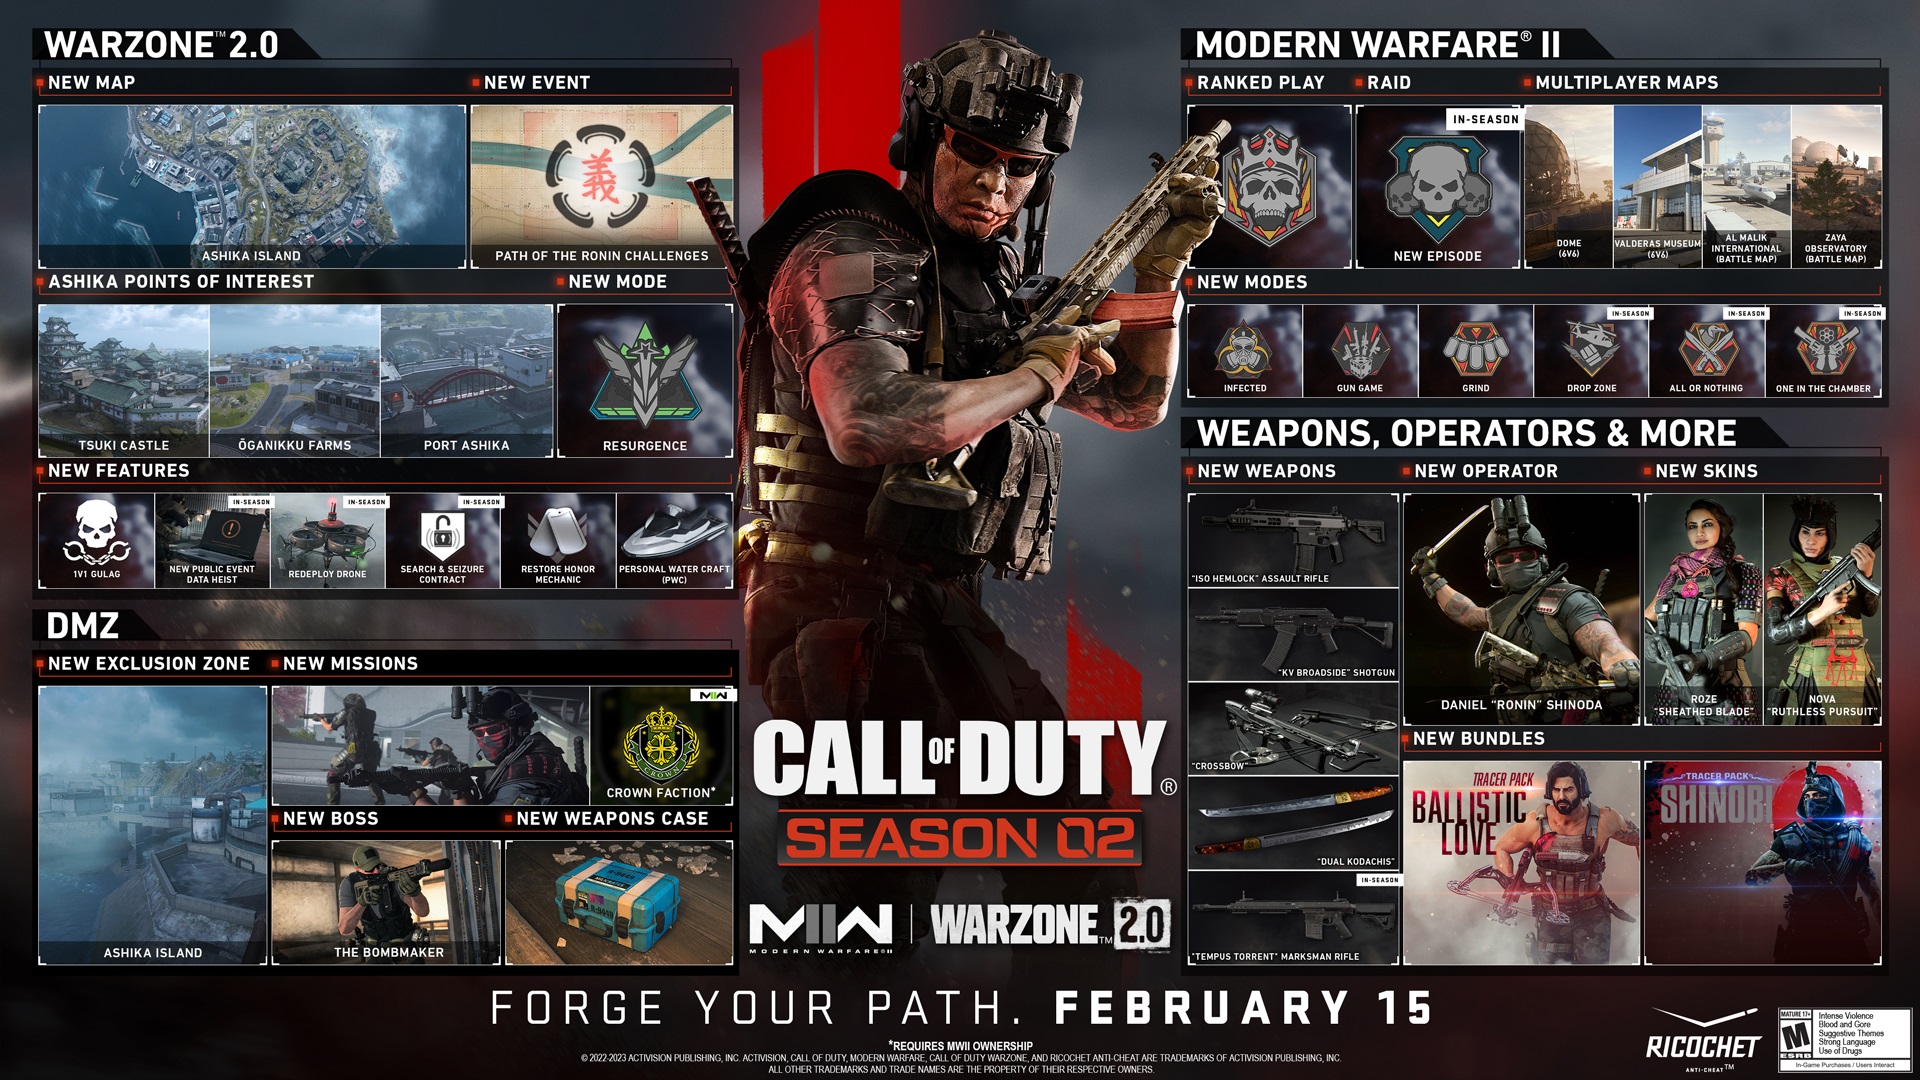 The Modern Warfare 2 and Warzone 2 Season 2 roadmap has been published